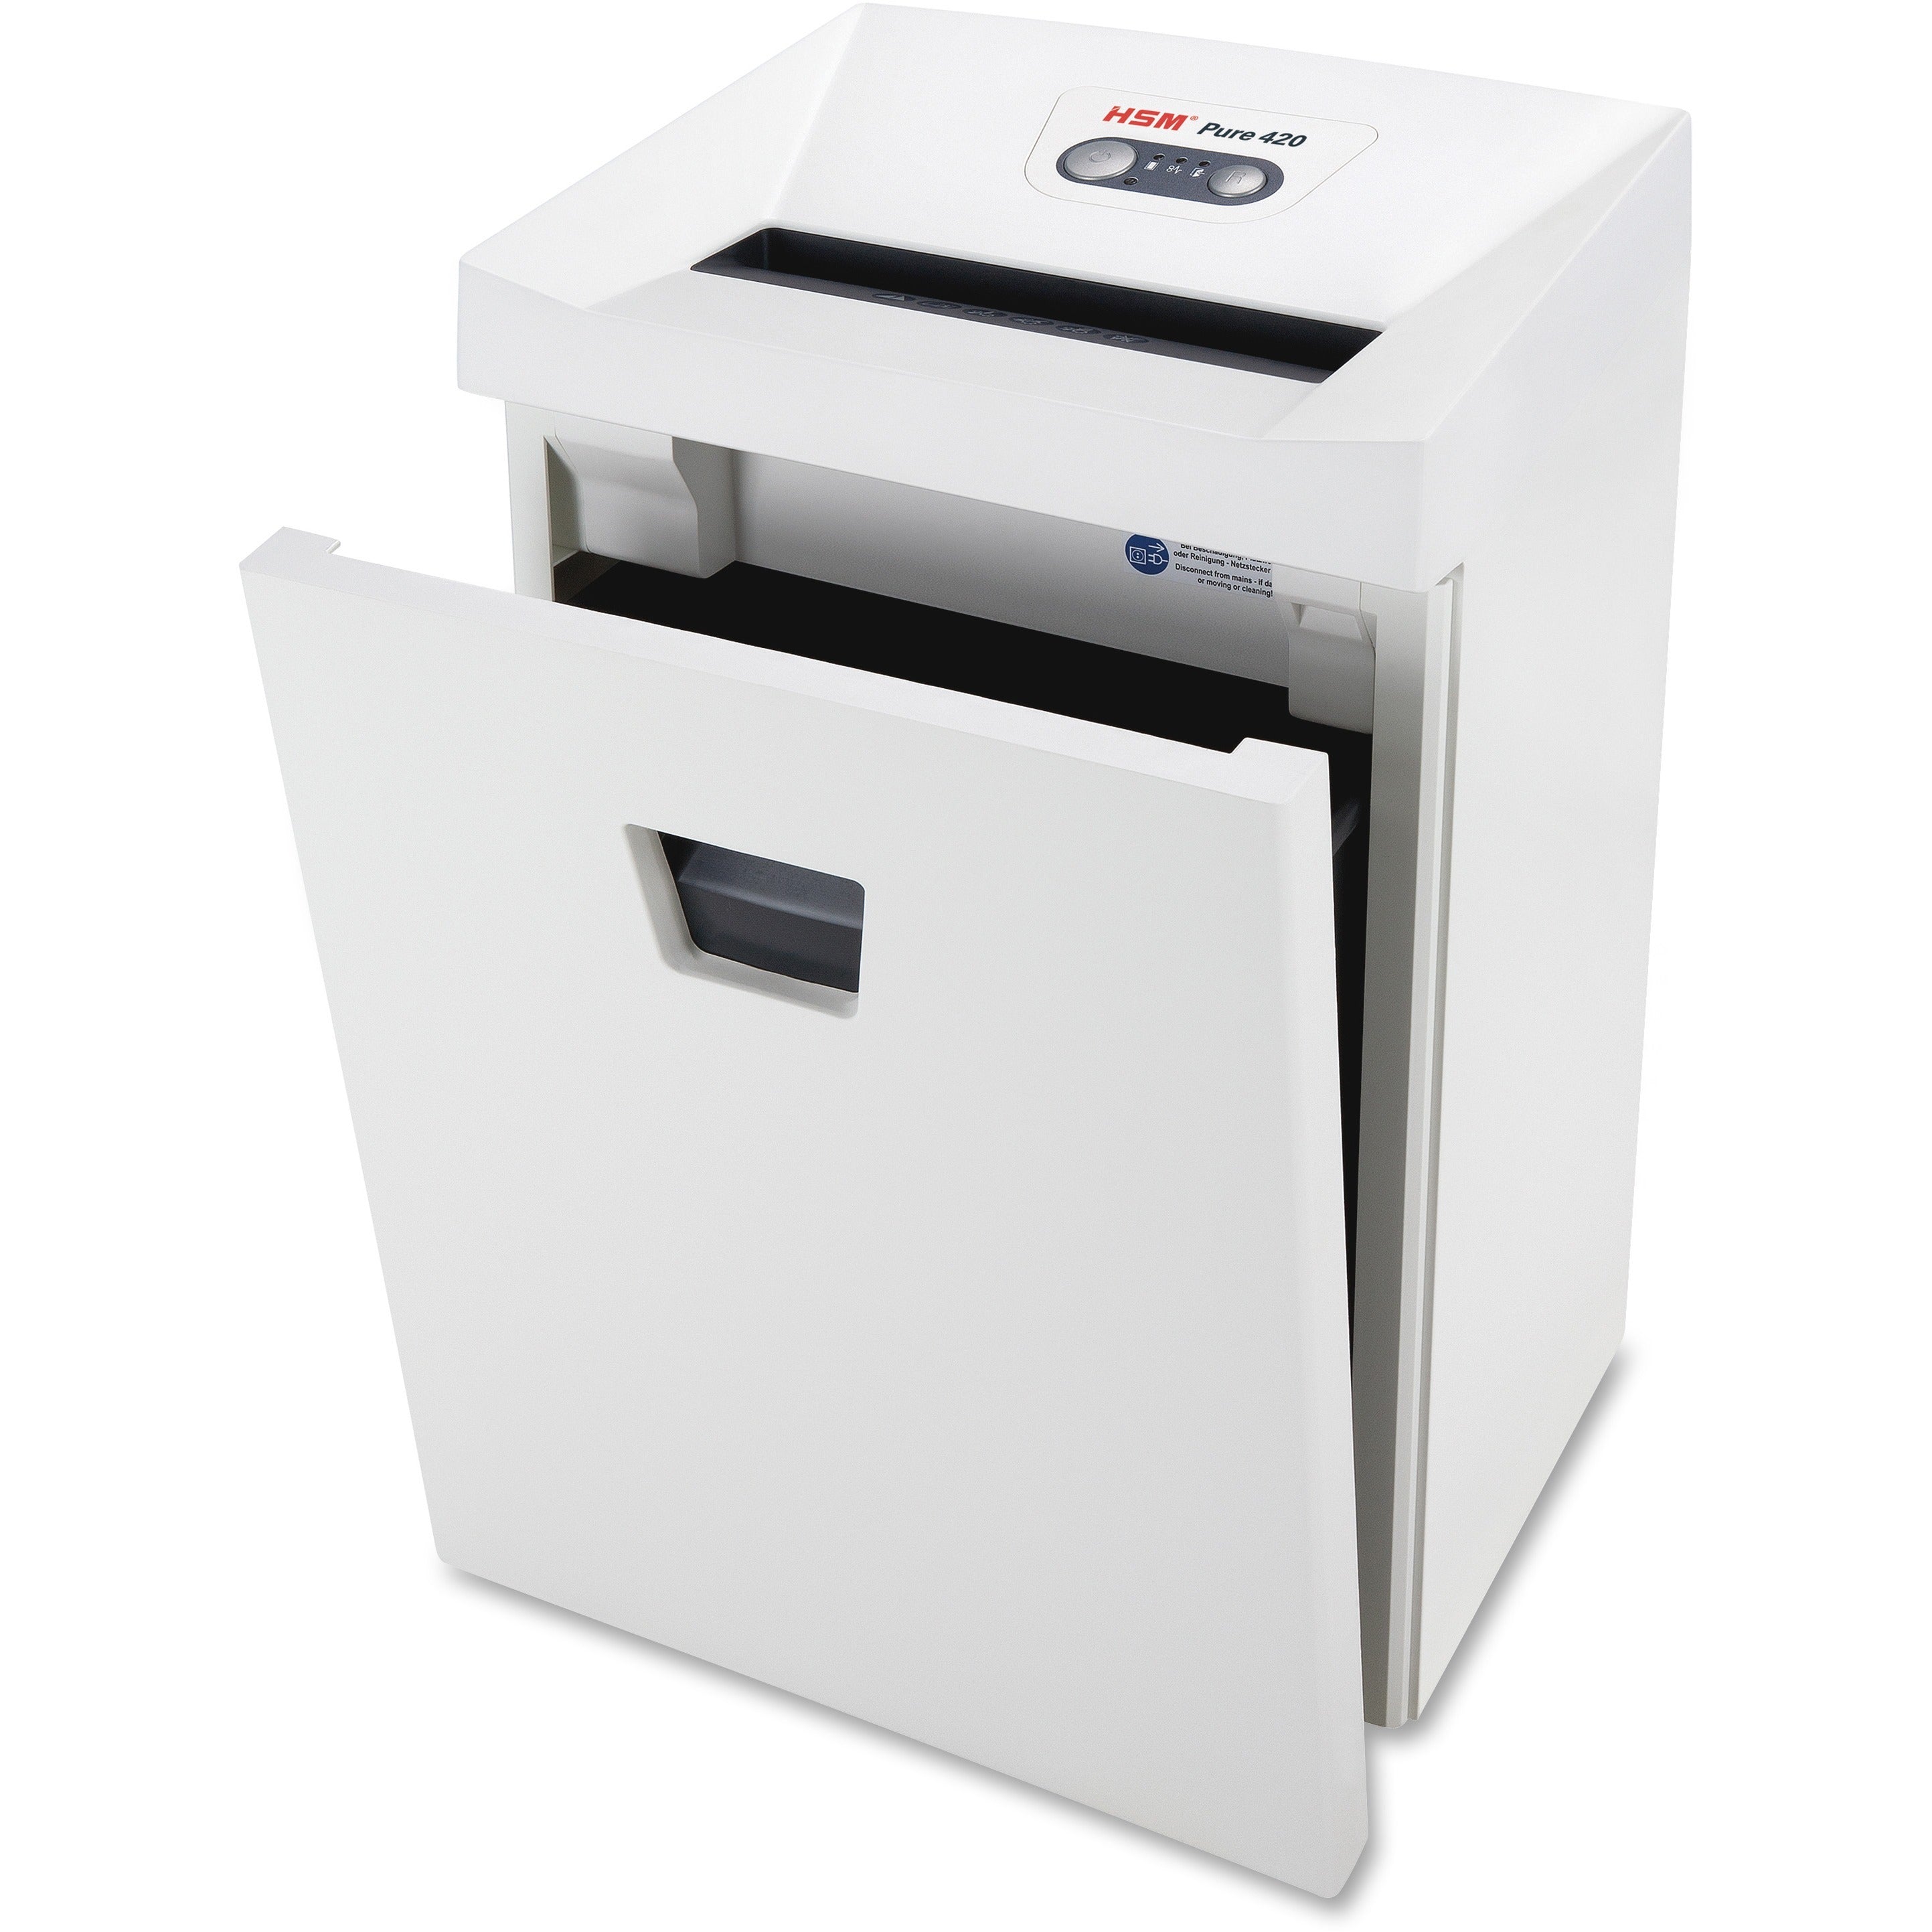 hsm-pure-420-3-16-x-1-1-8-continuous-shredder-particle-cut-15-per-pass-for-shredding-staples-paper-paper-clip-credit-card-cd-dvd-0188-x-1125-shred-size-p-4-o-3-t-4-e-3-f-1-945-throat-920-gal-wastebin-capacity-white-_hsm2343113 - 2